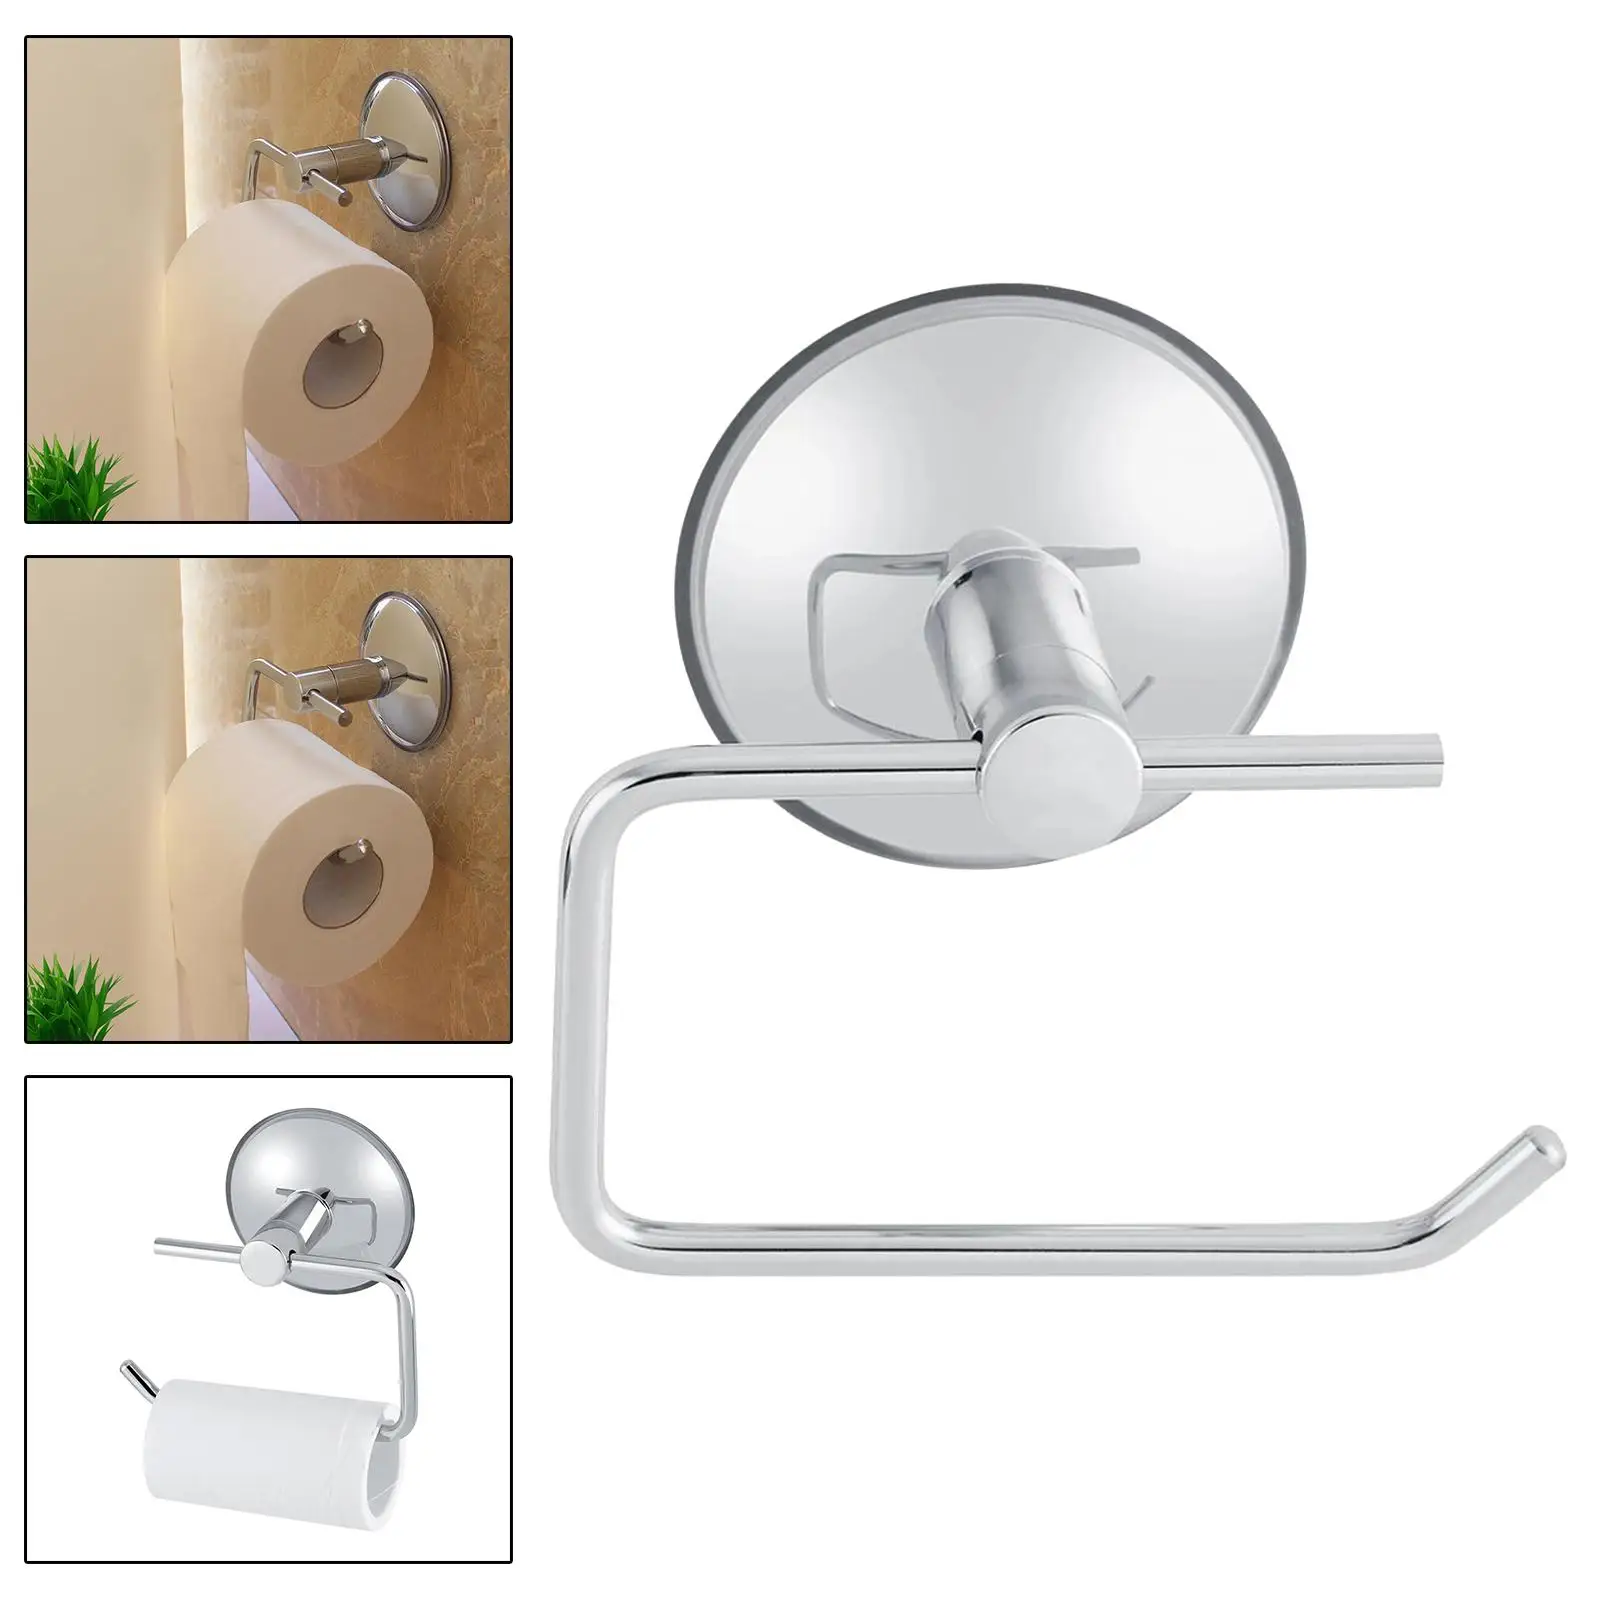 Adhesive Bathroom Tissue Roll Hanger Removable Bracket Wall Mount Suction Cup Paper Holder for Balcony Hotel Bedroom Kitchen